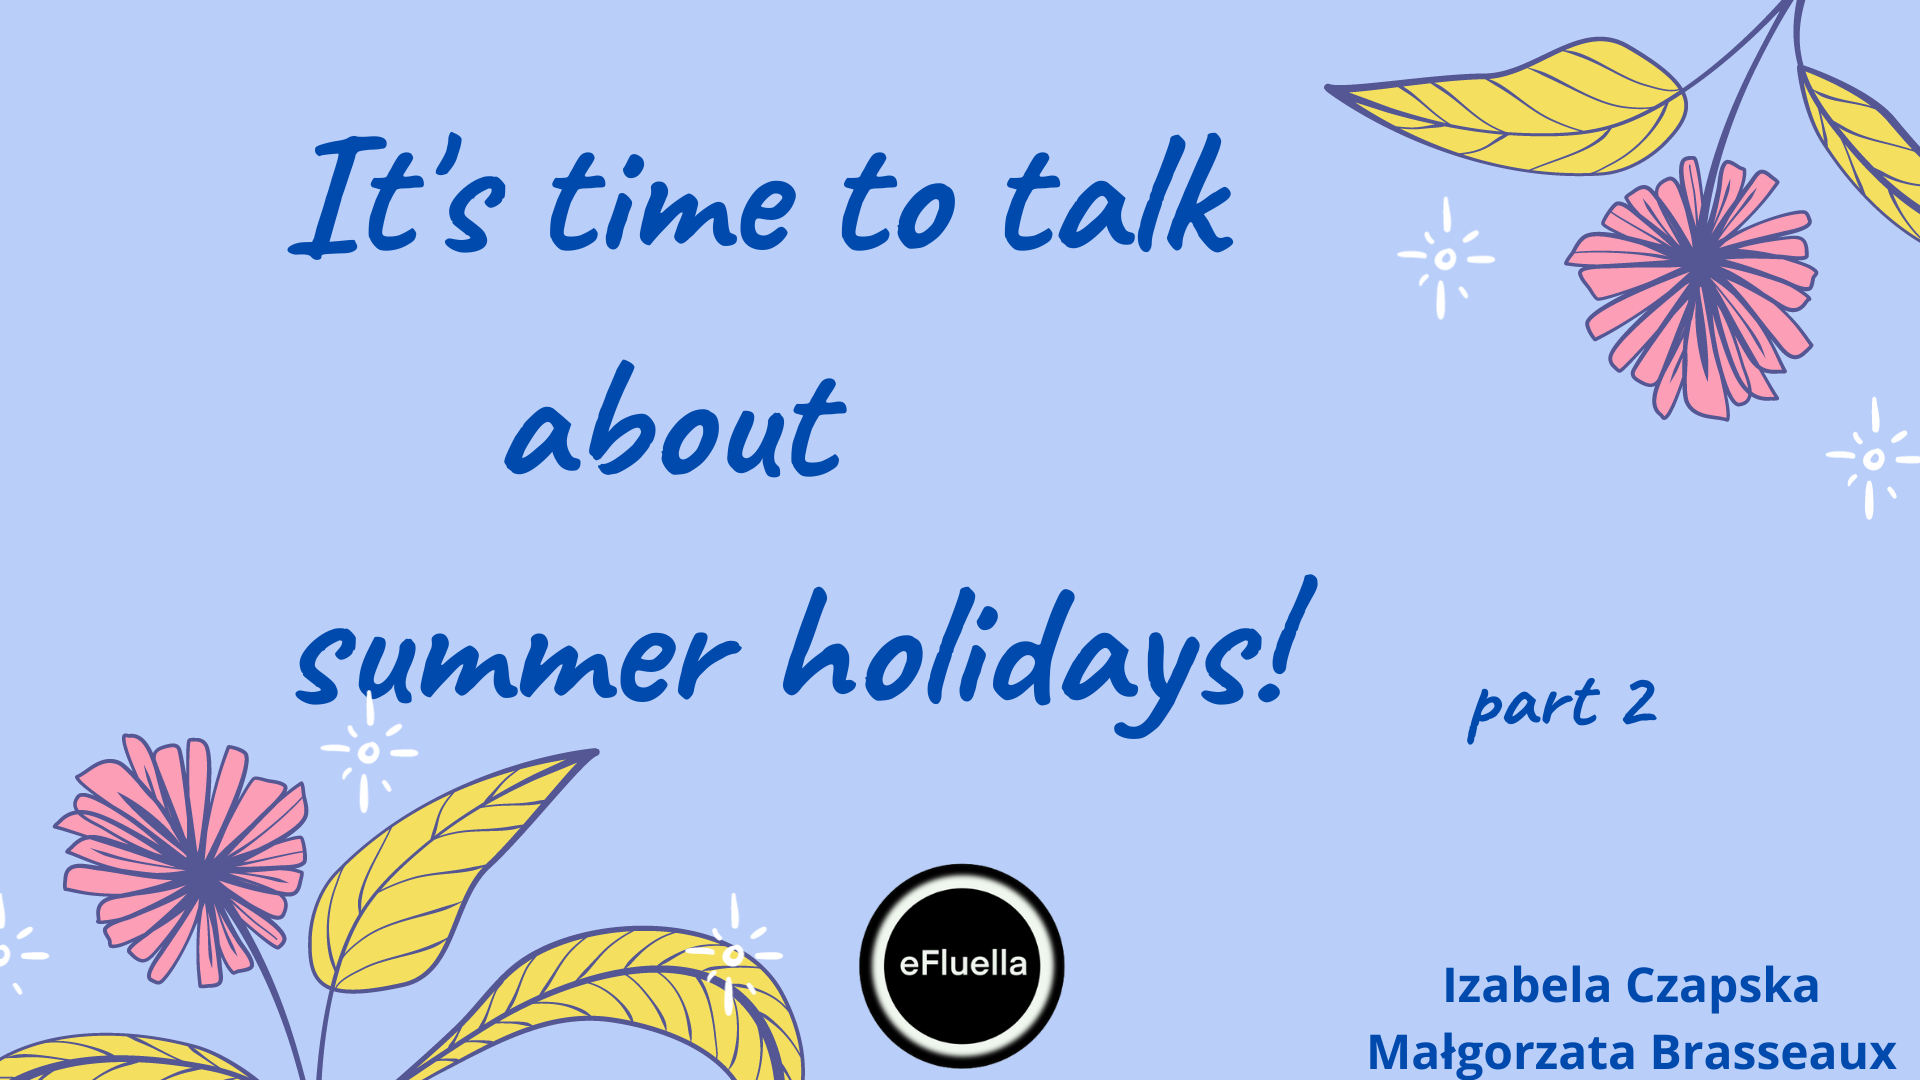 PART 2 IT_S TIME TO TALK ABOUT SUMMER HOLIDAYS